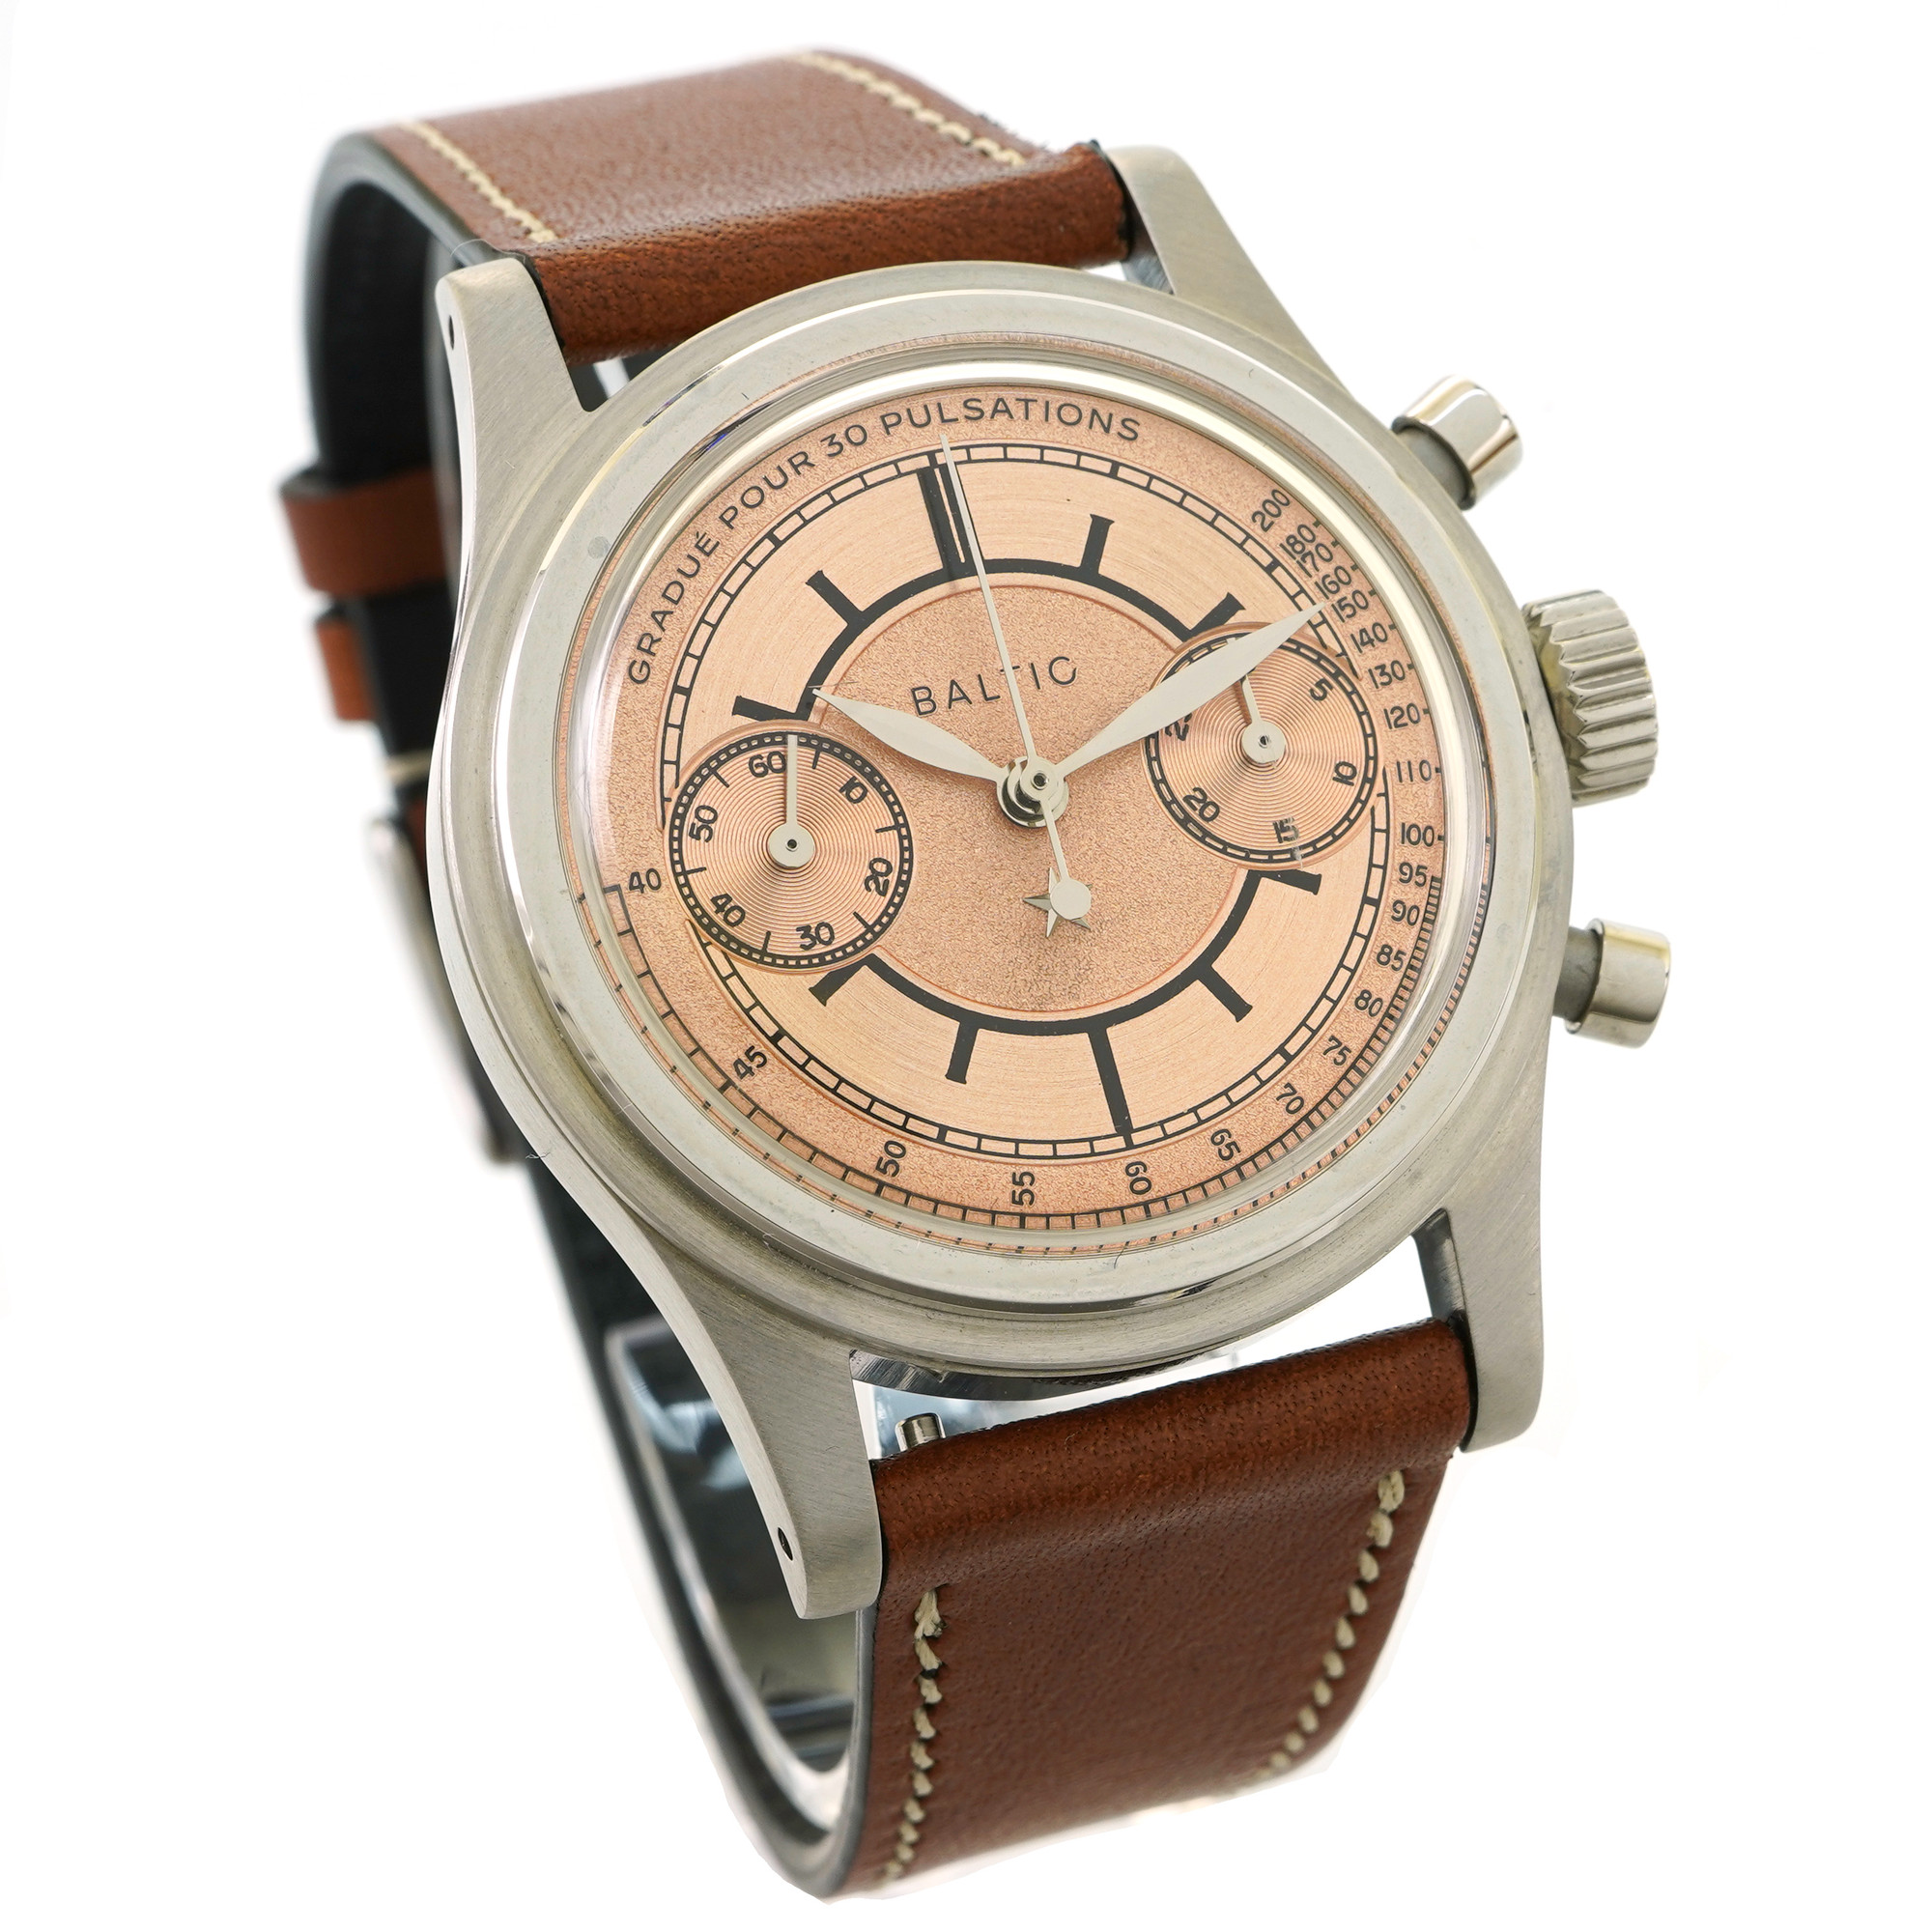 Baltic Bicompax Pulso Chronograph *Limited Edition* - Inventory 5136